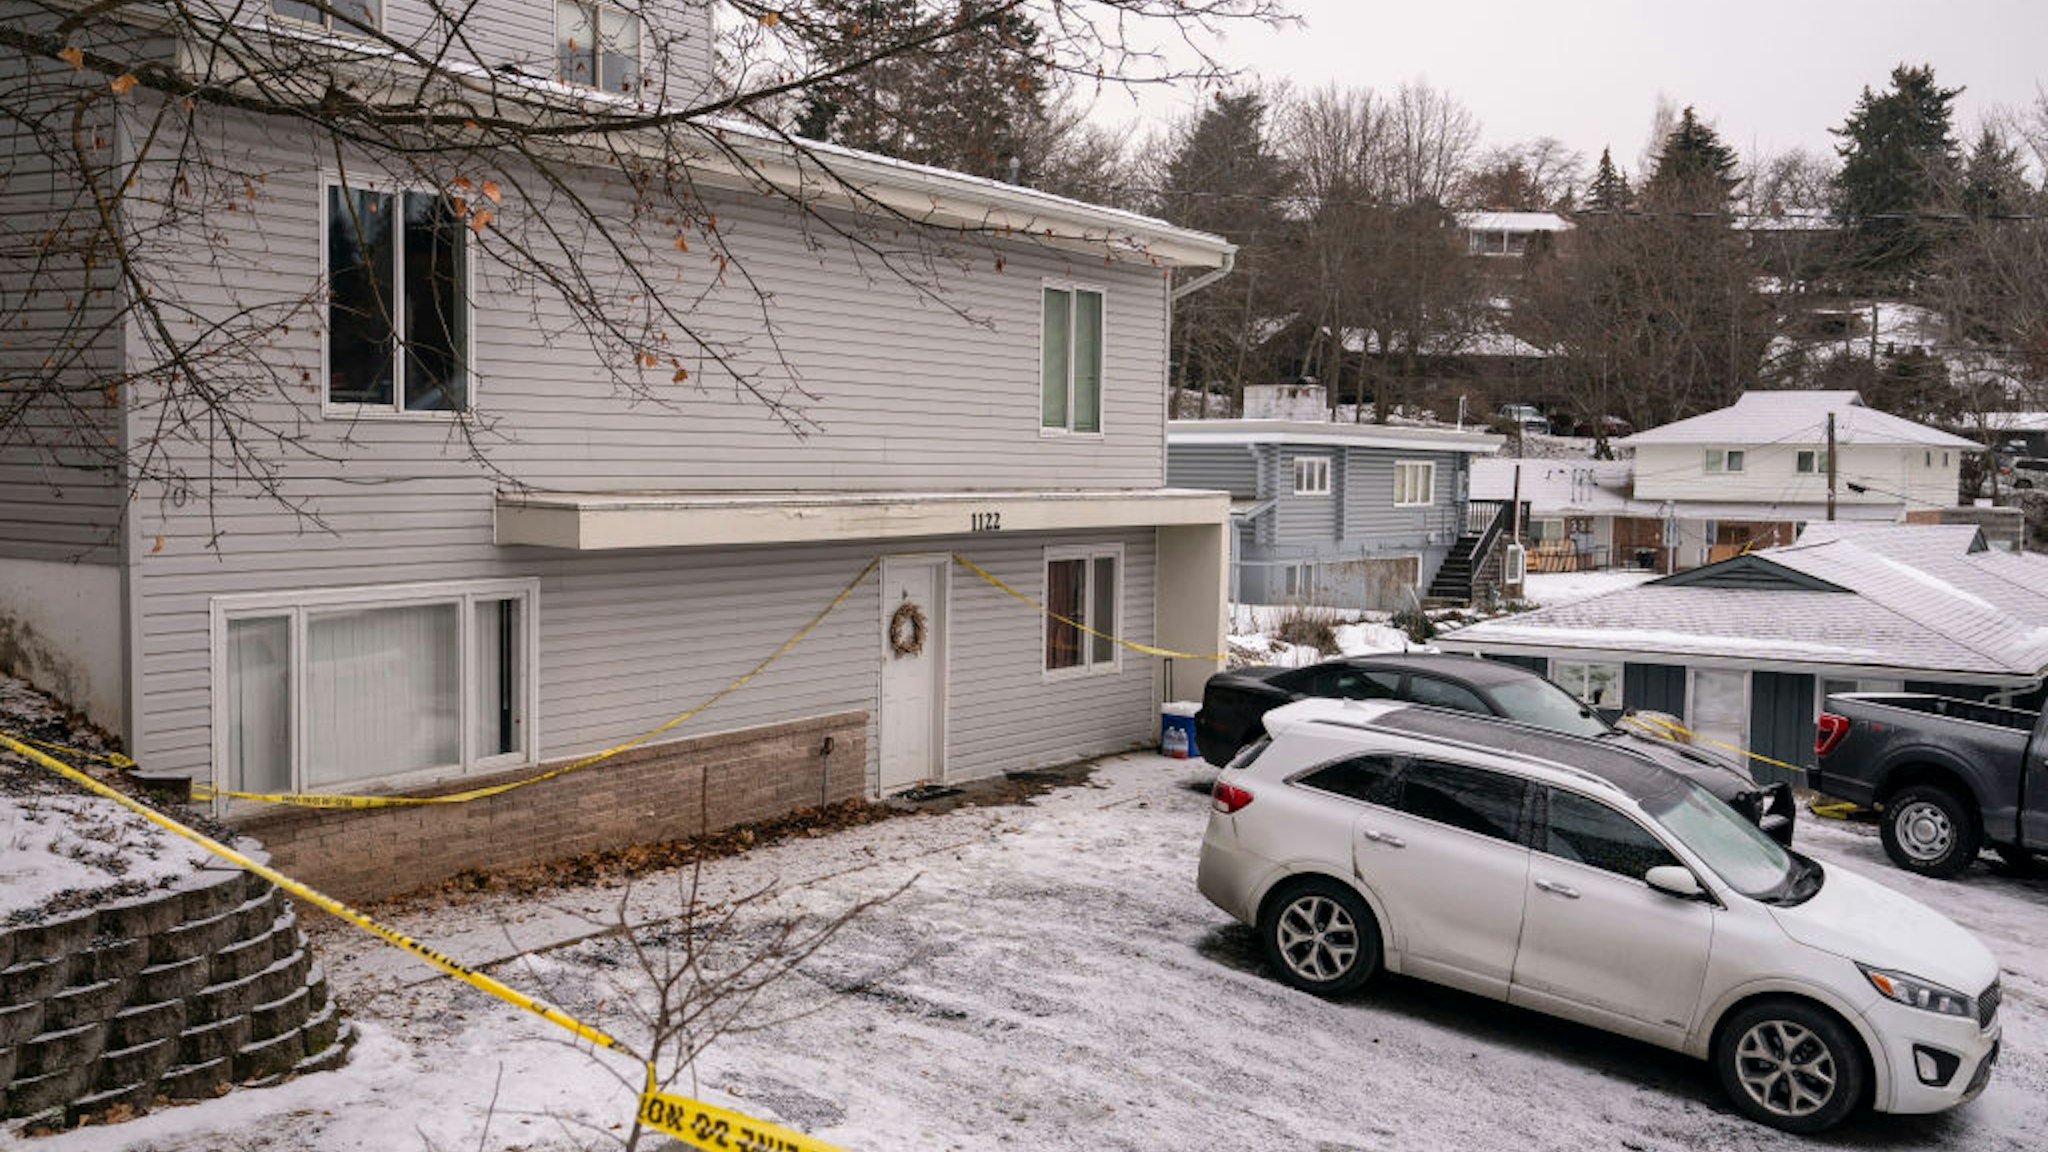 Police tape surrounds a home that is the site of a quadruple murder on January 3, 2023 in Moscow, Idaho.